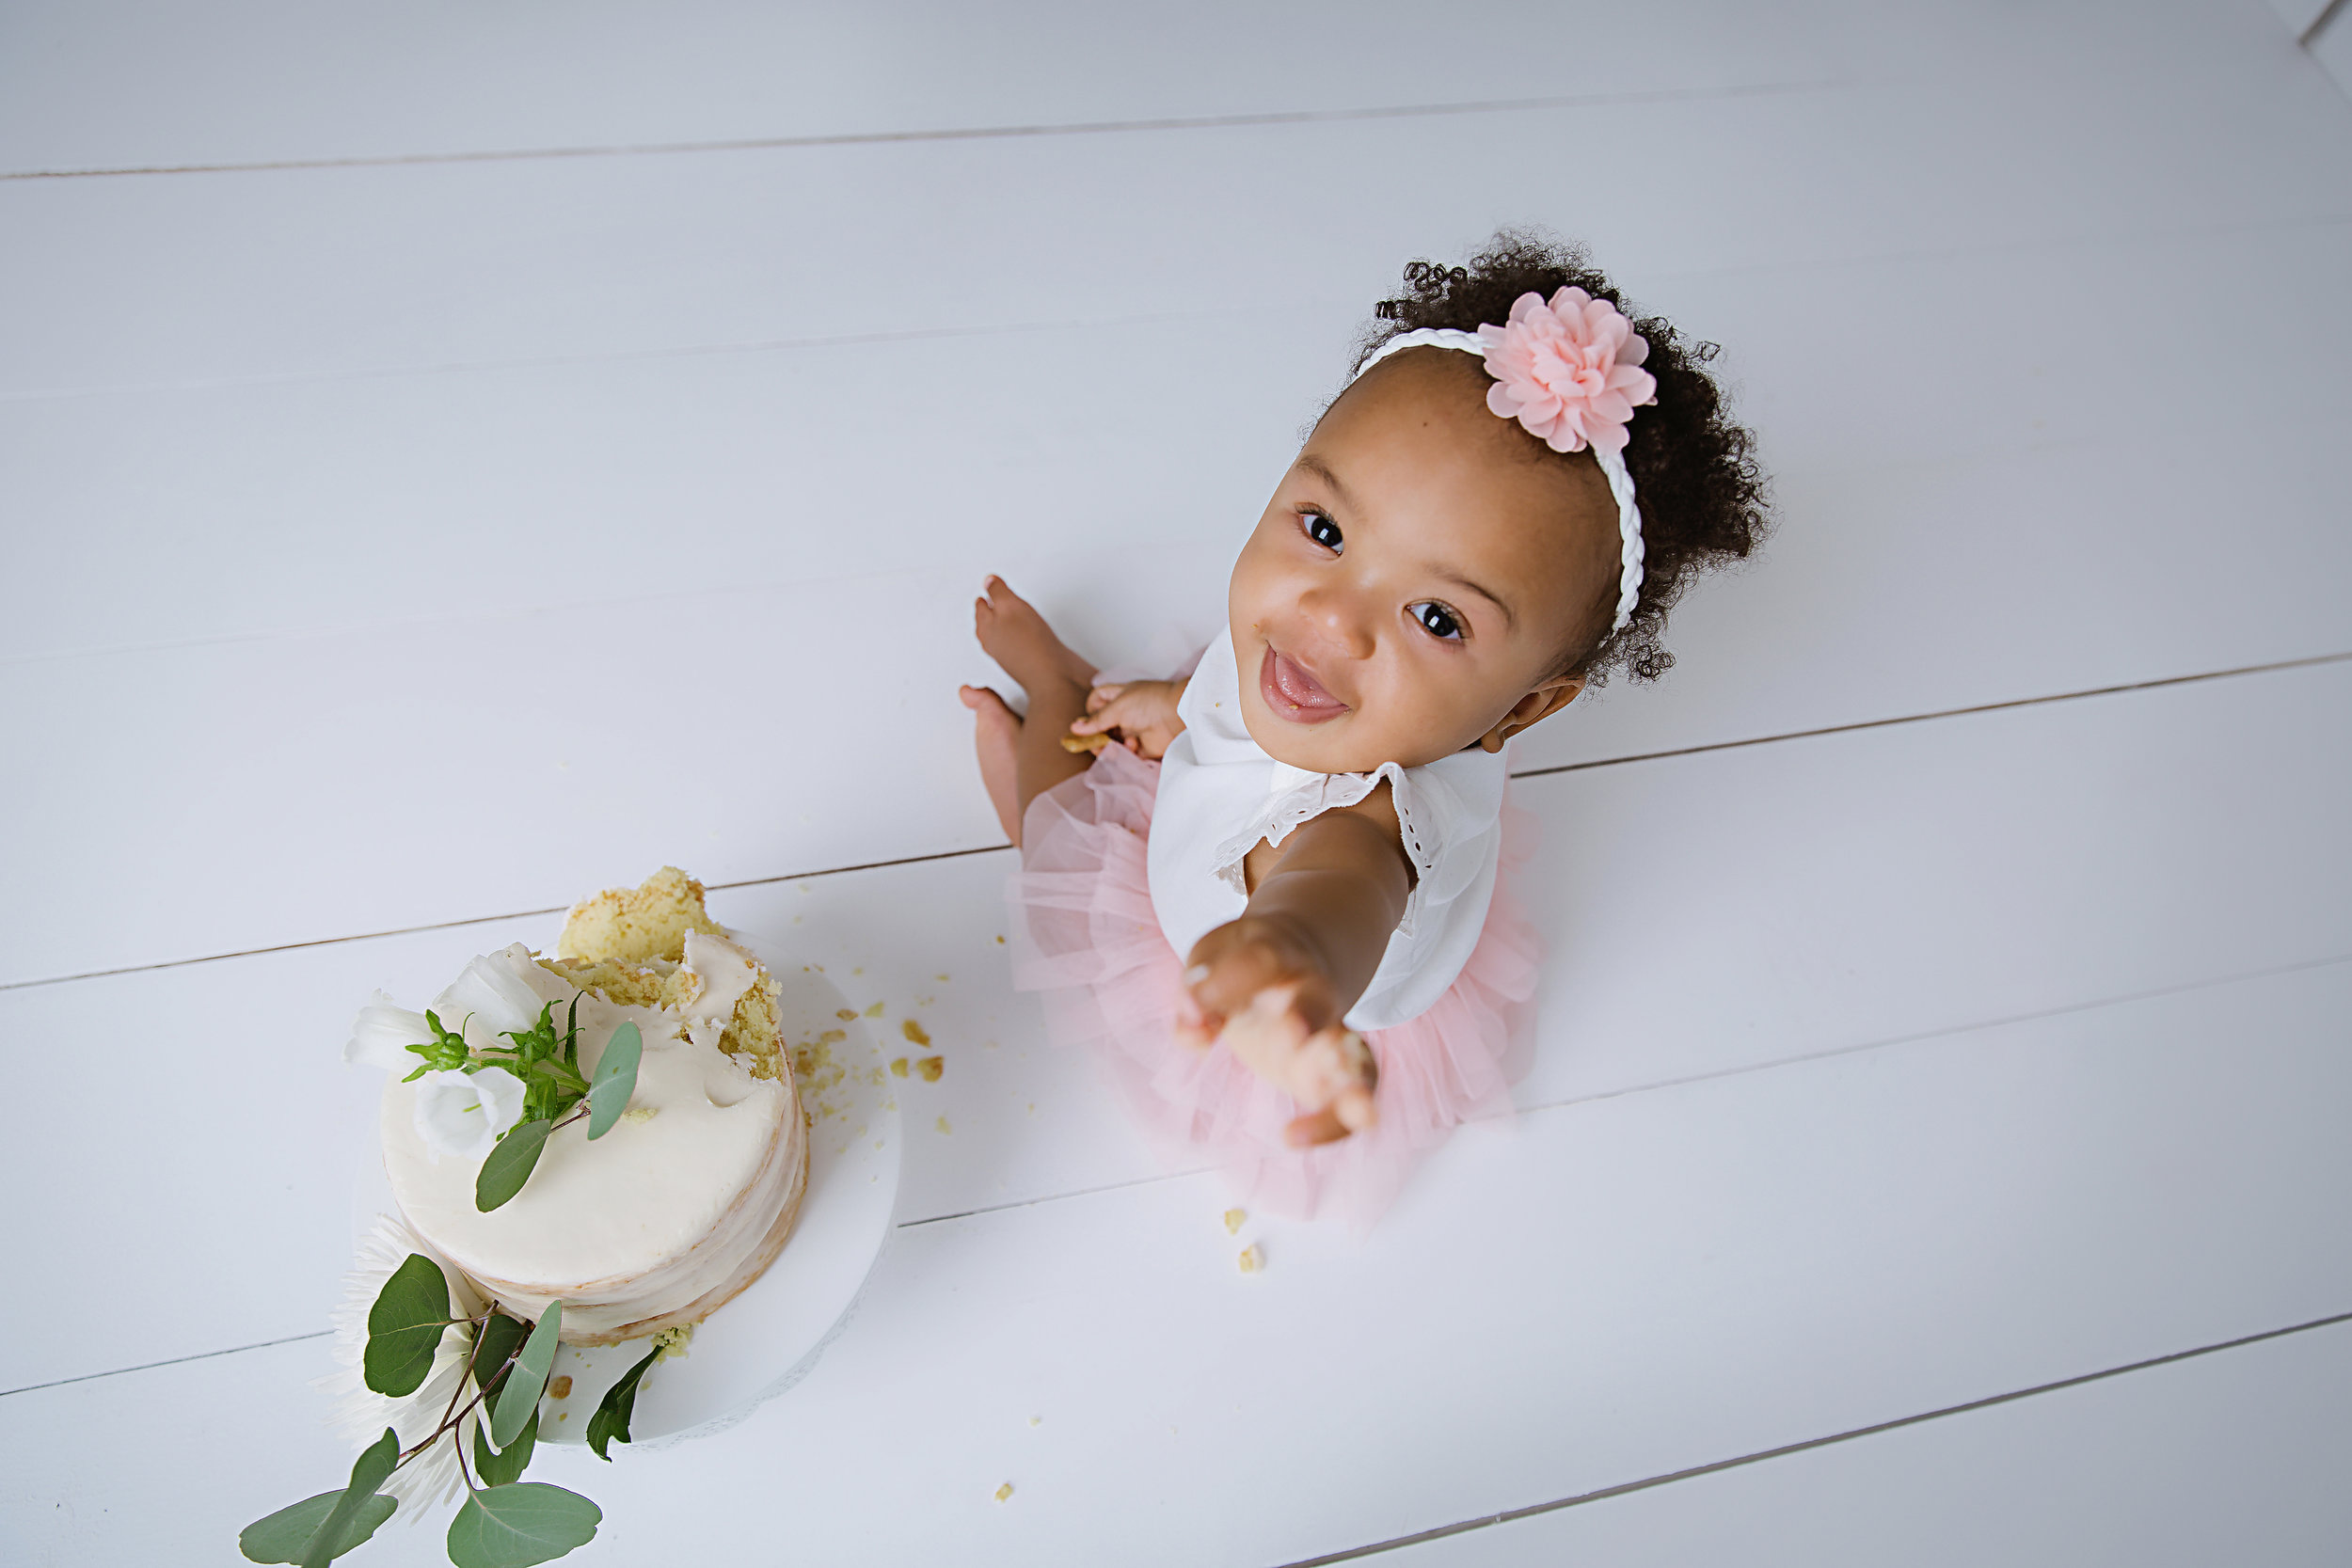 giggling-baby-girl-photography-shoot-cake-first-birthday-new-jersey